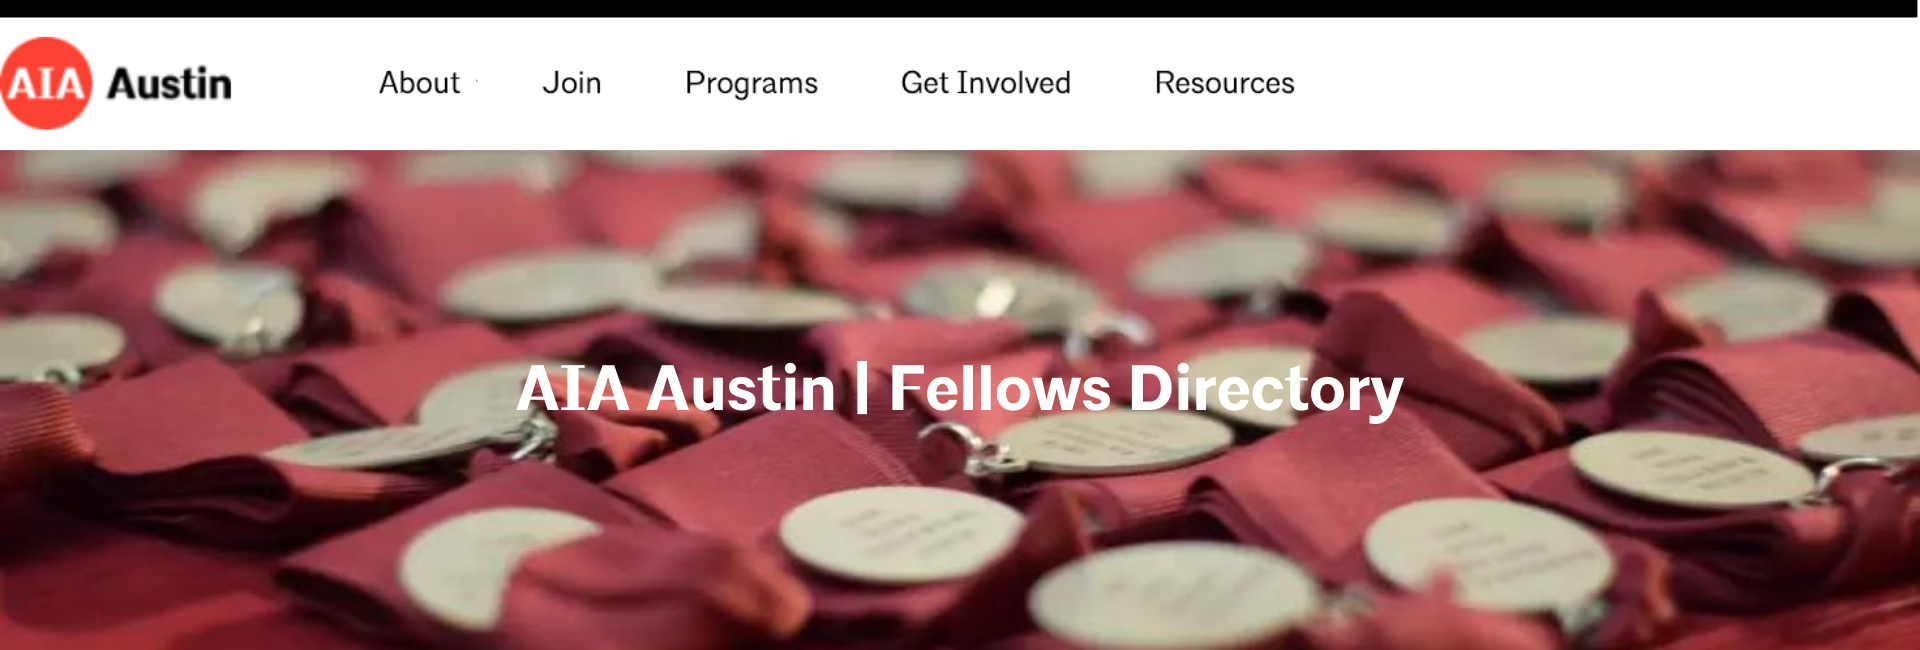 Austin Foundation for Architecture - AIA Austin | Fellows Directory